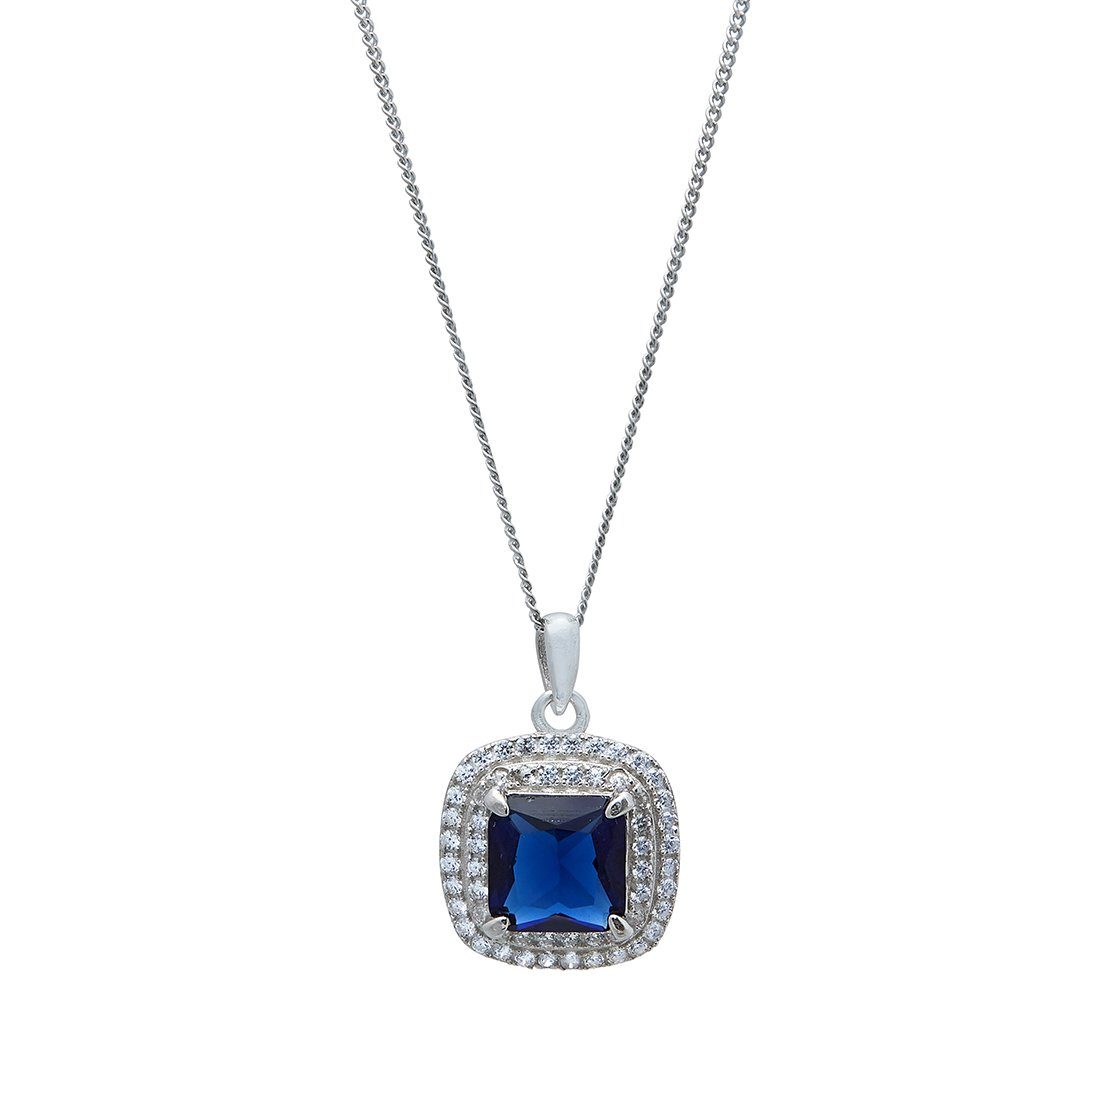 Blue Sapphire Cubic Zirconia Necklace in Sterling Silver Necklaces Bevilles 